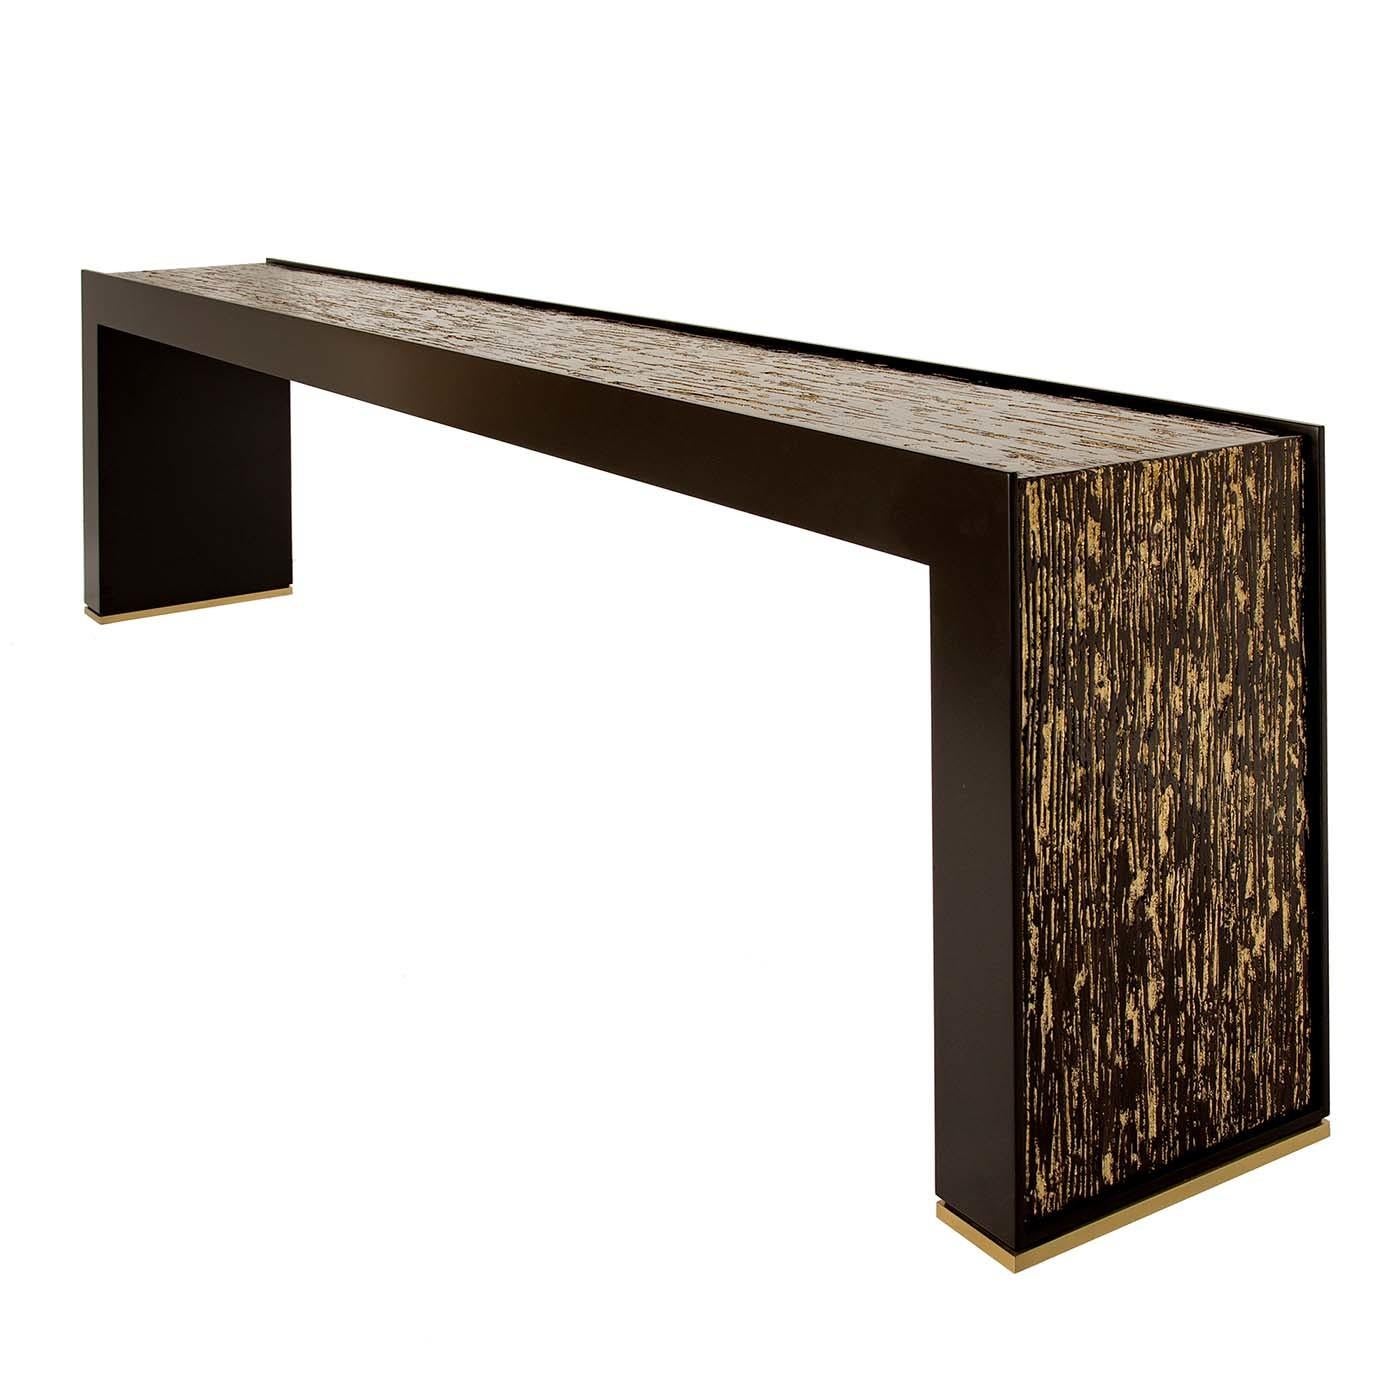 Solid and impressive white, at the same time, extremely elegant, this console table is perfect for furnishing living rooms or hallways. The structure is entirely in black lacquered wood with gold and black material decorations on the top and sides.